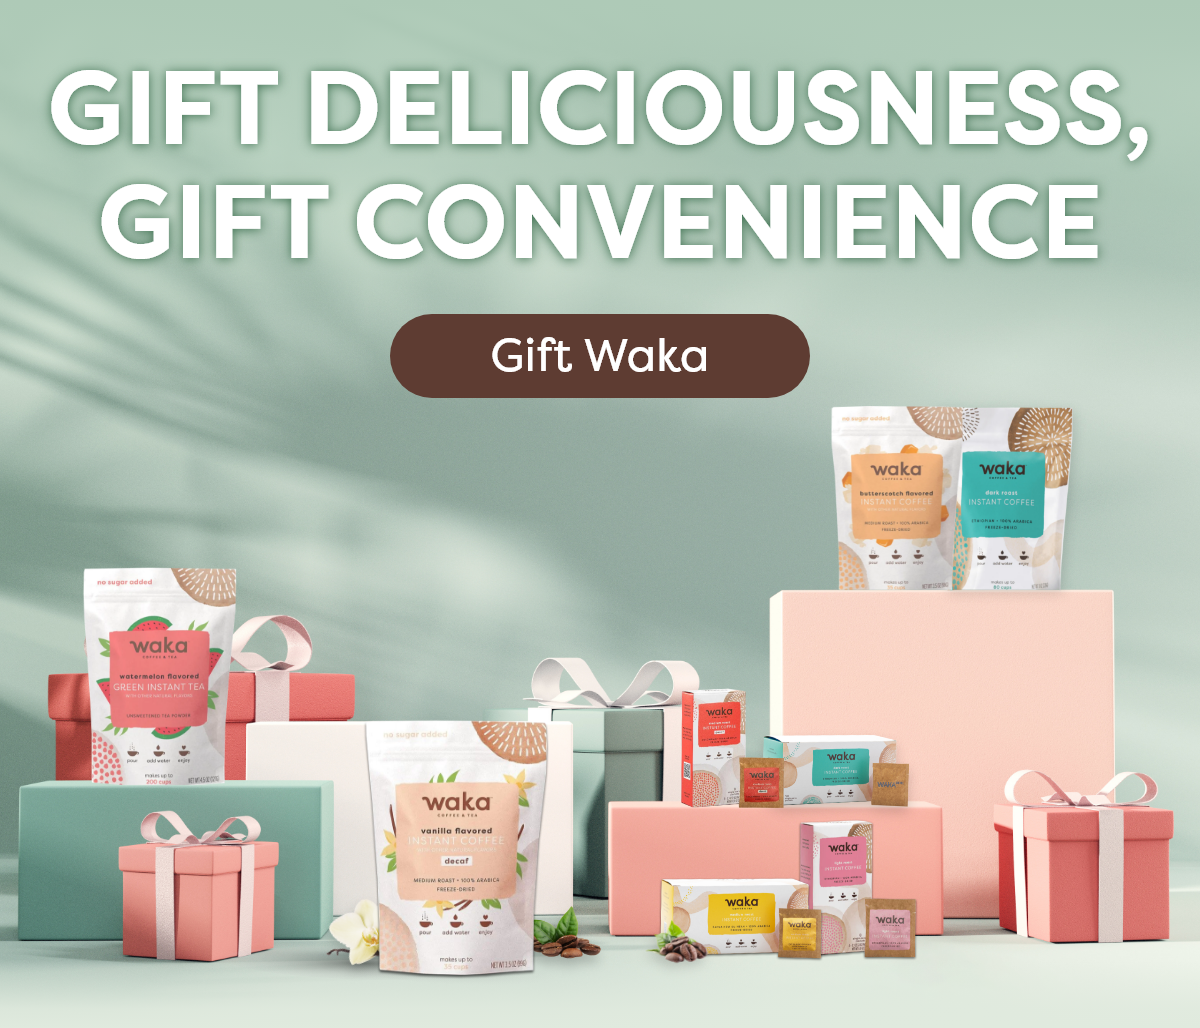 Gift Deliciousness, Gift Convenience [Gift Waka]